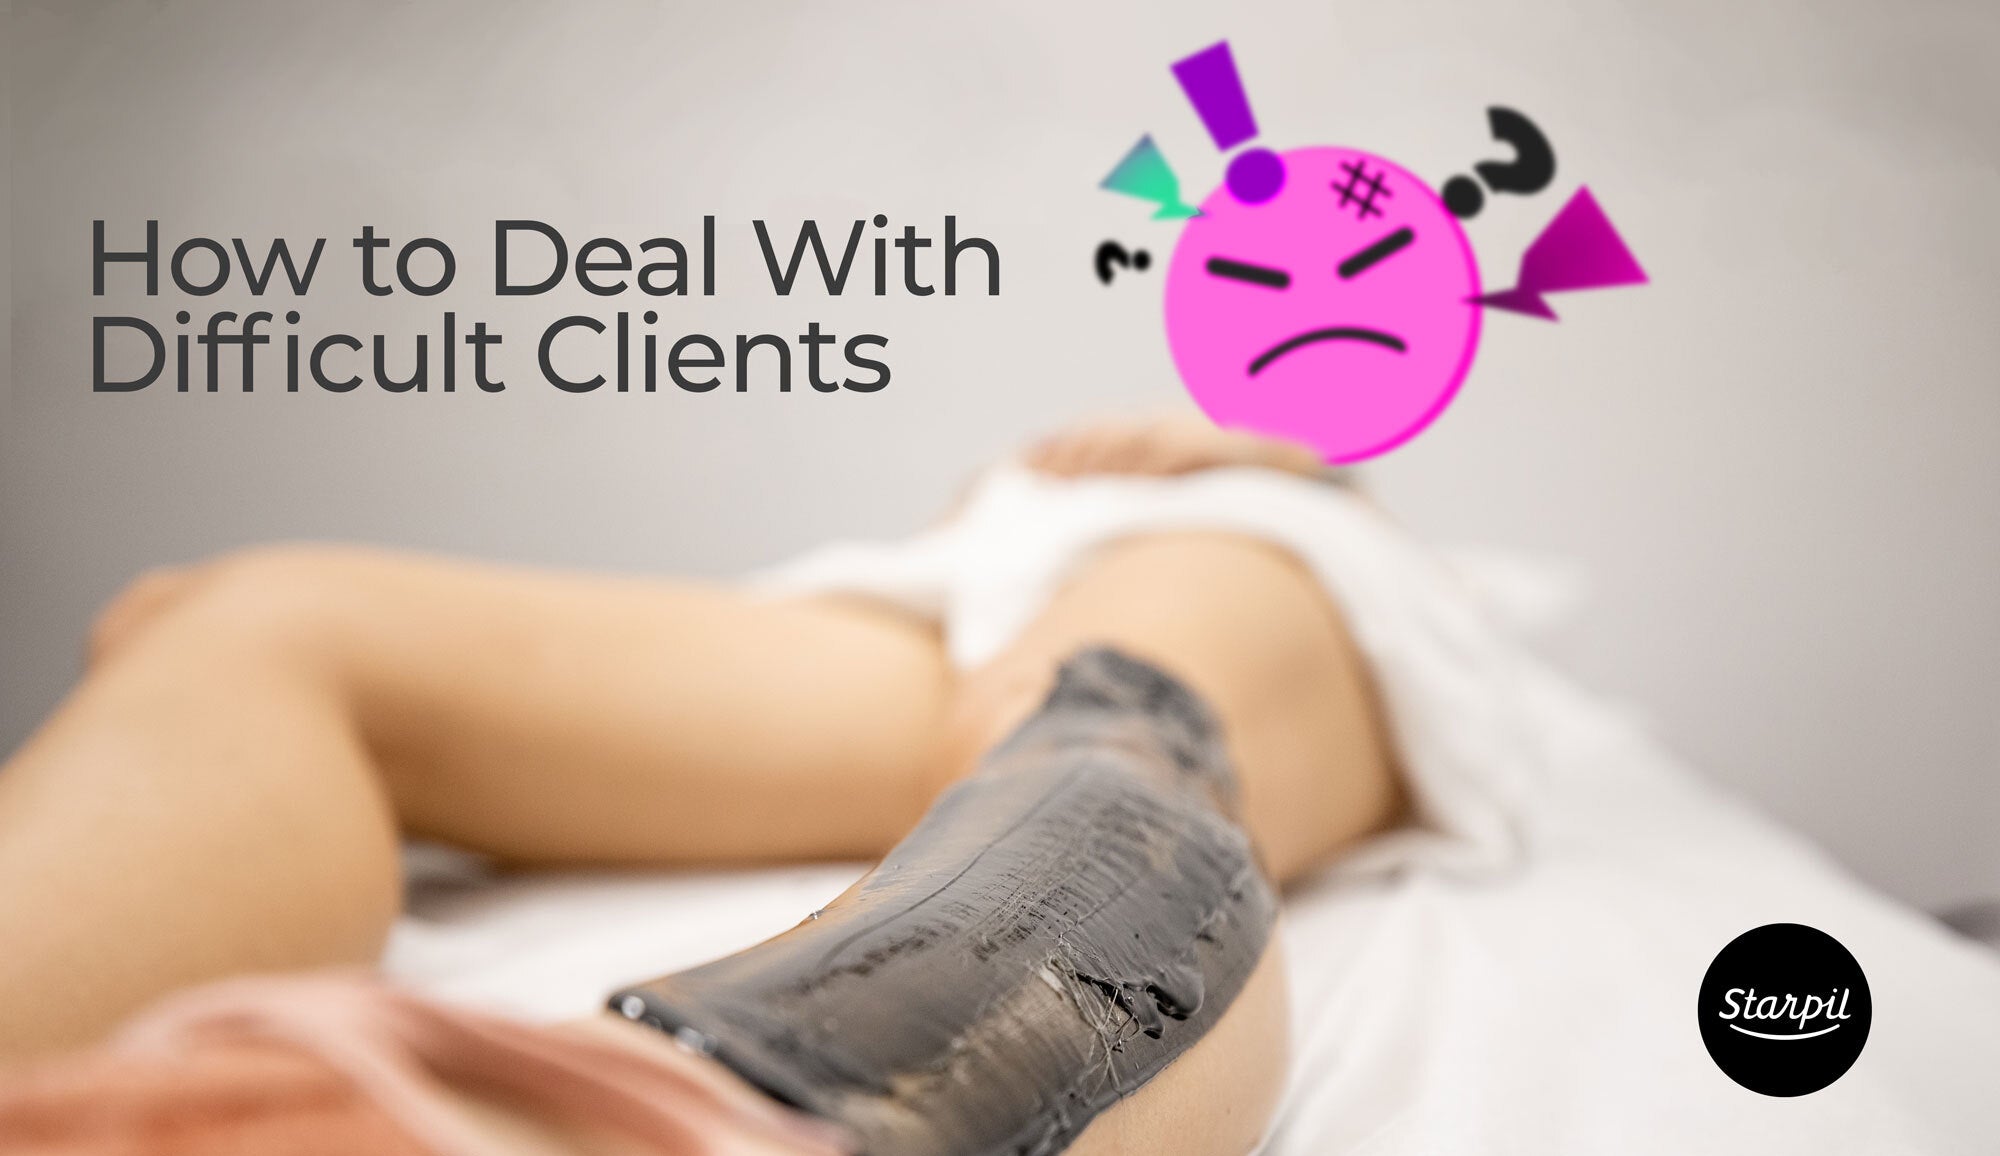 Dealing with difficult salon clients